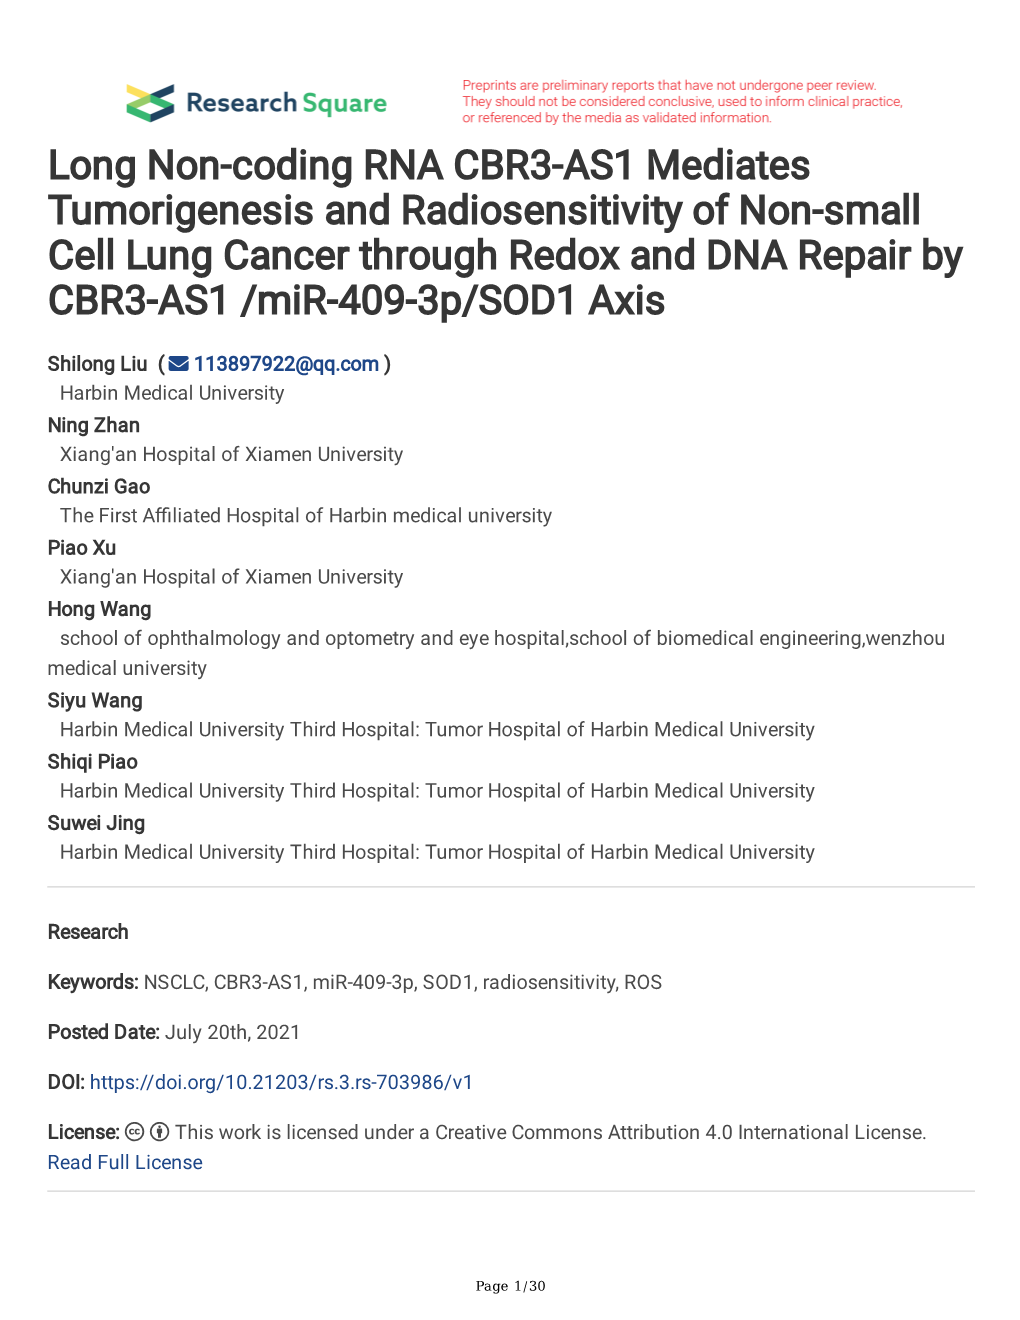 Long Non-Coding RNA CBR3-AS1 Mediates Tumorigenesis and Radiosensitivity of Non-Small Cell Lung Cancer Through Redox and DNA Repair by CBR3-AS1 /Mir-409-3P/SOD1 Axis